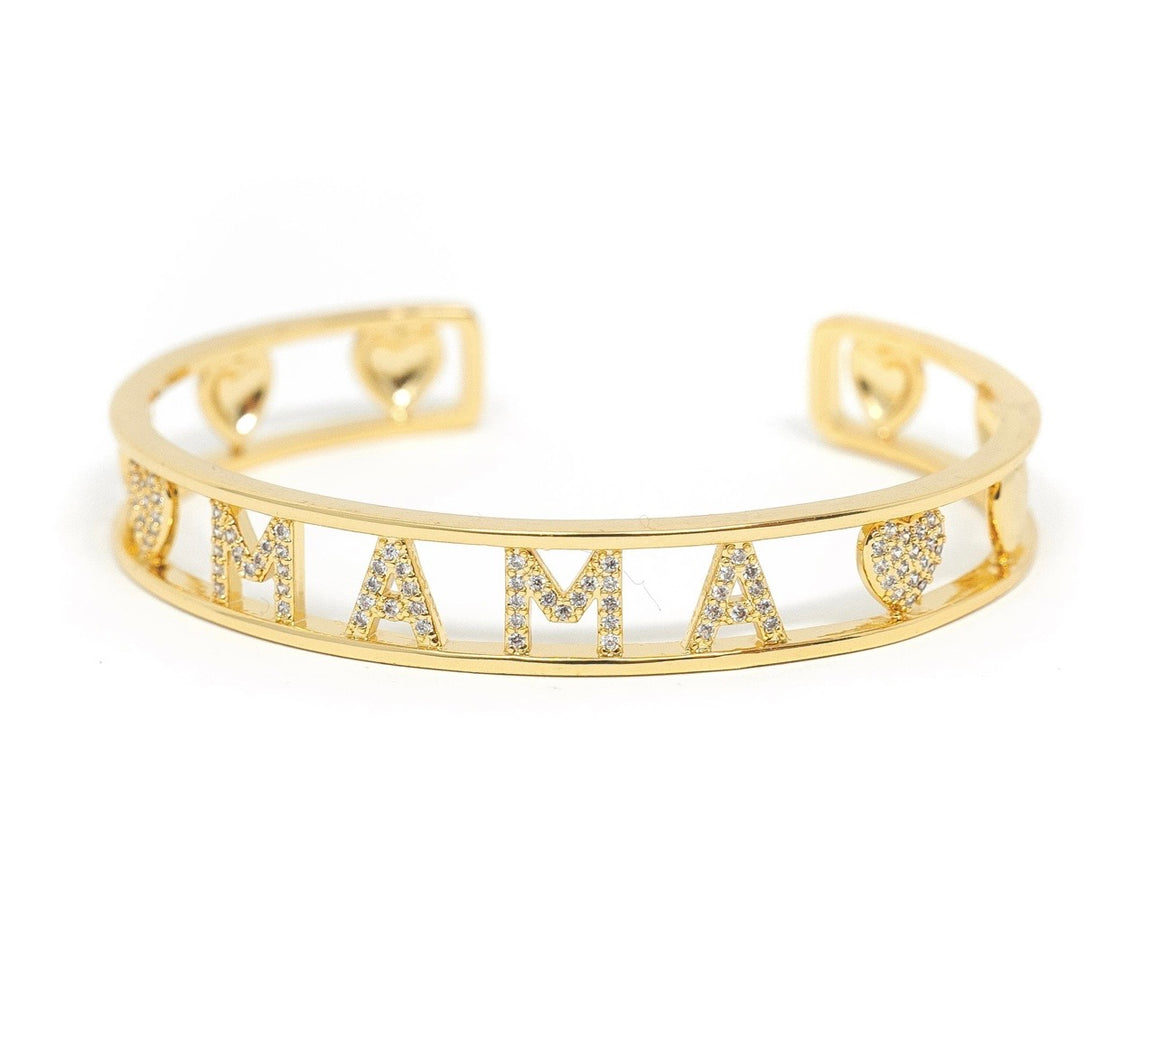 Gold and Crystal Heart Mama Cuff